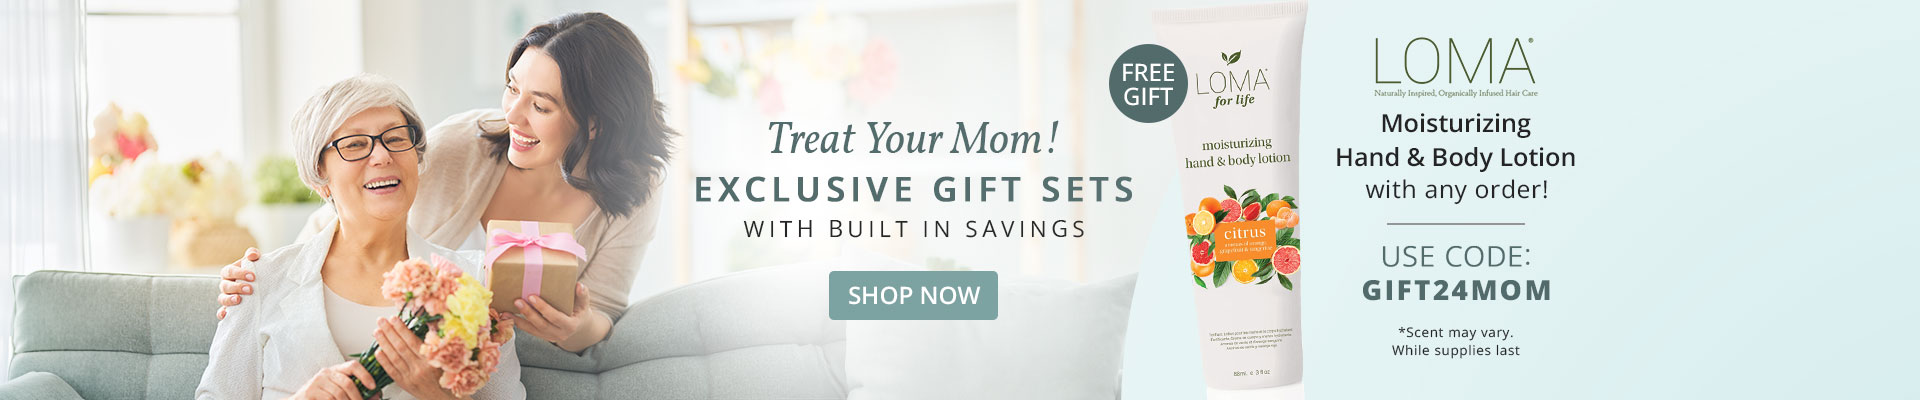 Treat Your Mom! Exclusive Gift Sets with Built in Savings + Free Loma Gift: Use Code GIFT24MOM